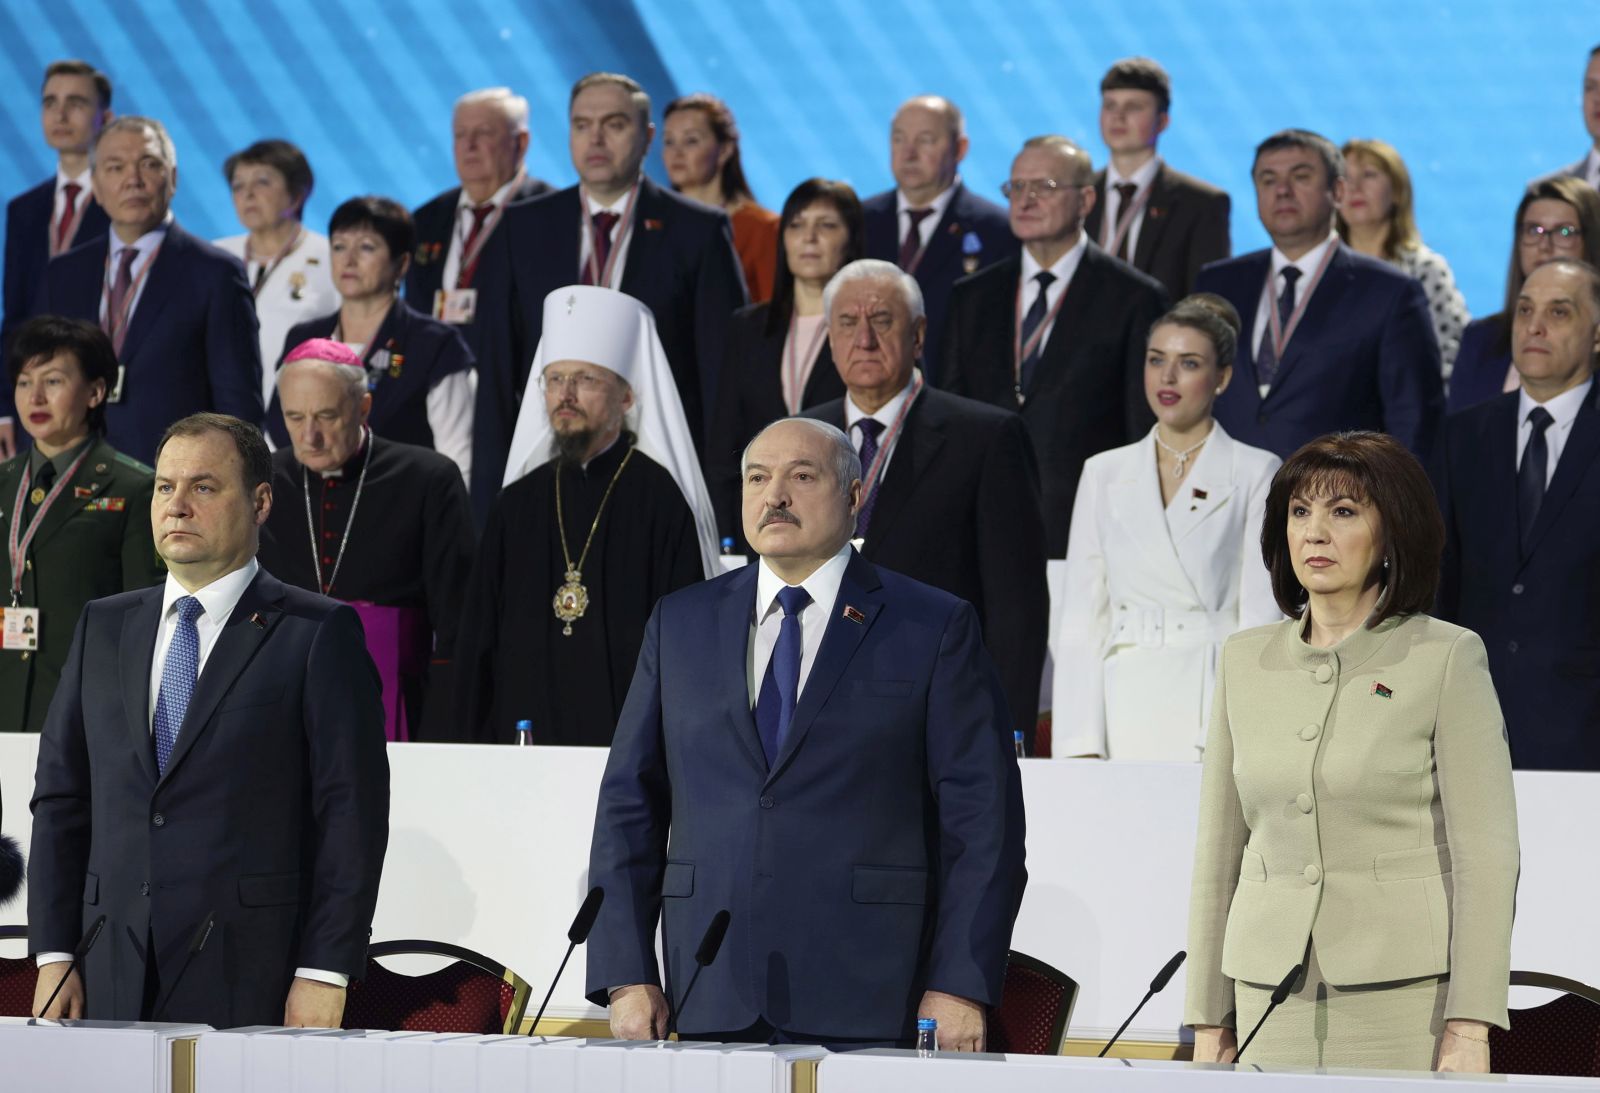 epa09003590 Belarusian President Alexander Lukashenko (C) attends the All Belarusian People's Assembly in Minsk, Belarus, 11 February 2021. Participants of the assembly will discuss social and political developments of the country.  EPA/MAXIM GUCHEK/ POOL